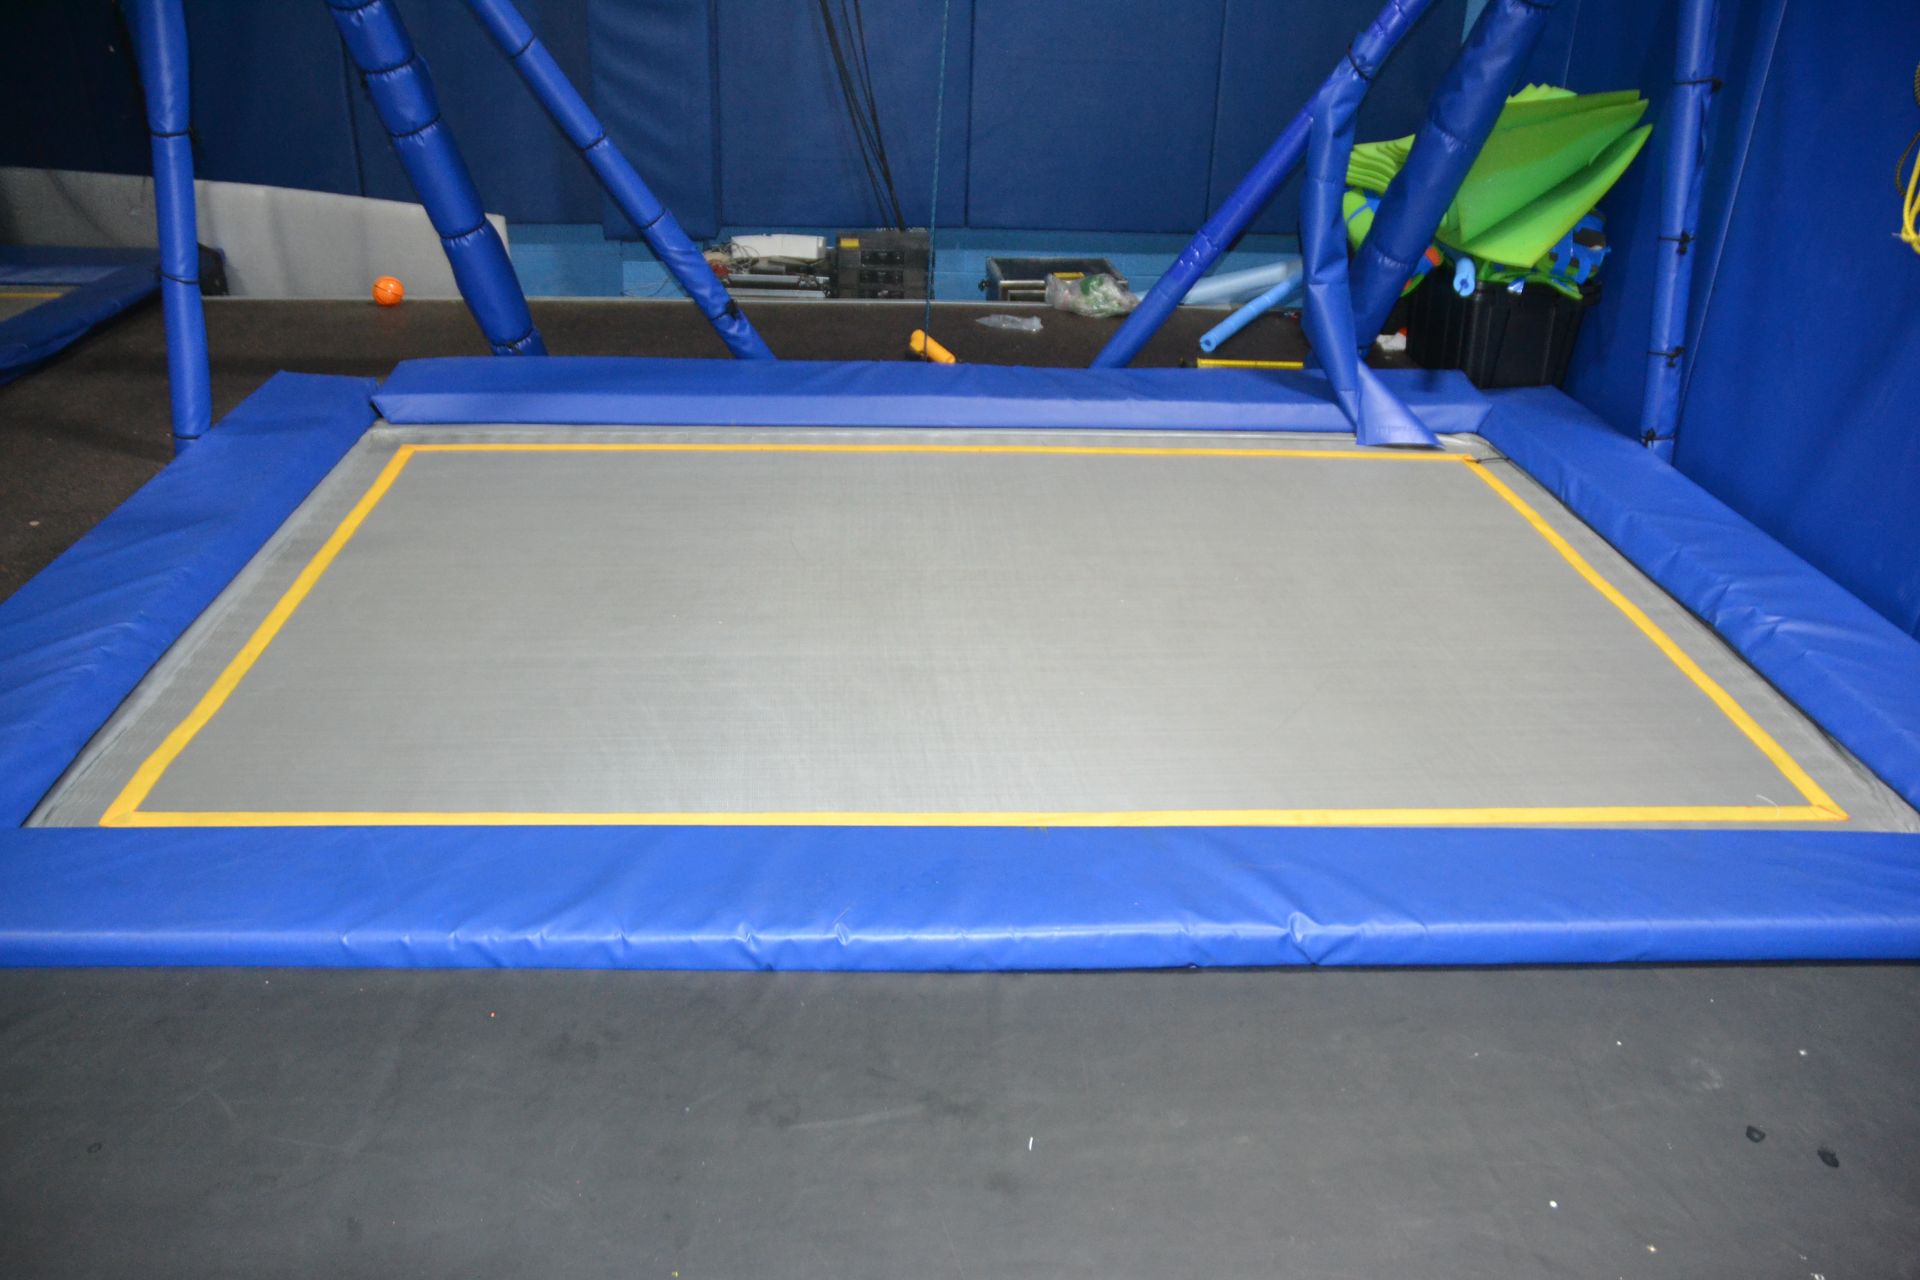 Trampoline Bungee Jump Area Including: (1) 11' x 8 1/2' Trampoline, Bungee Equipment (Ropes &